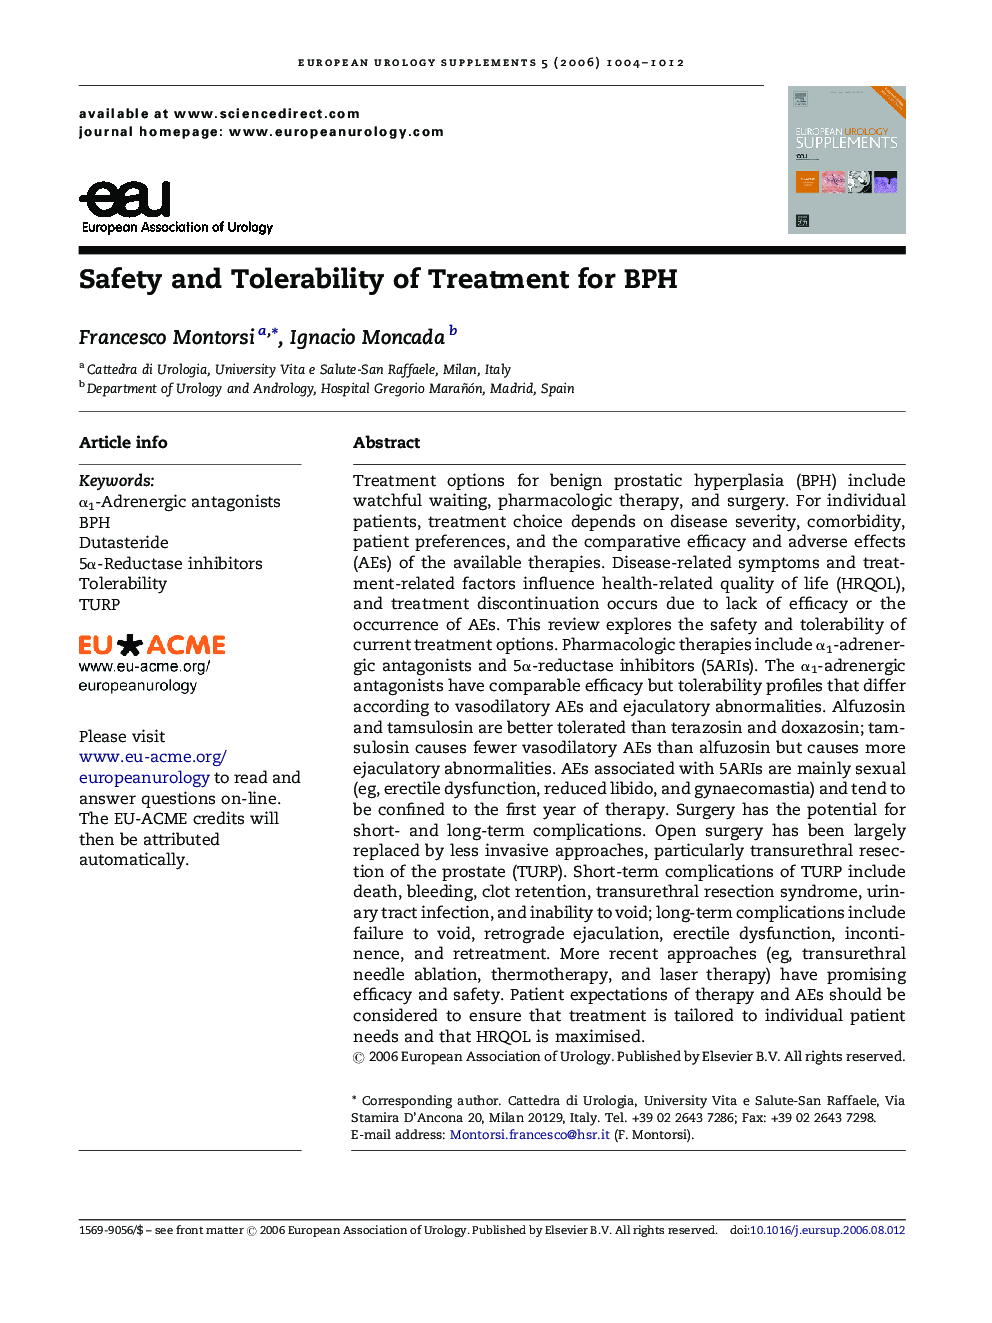 Safety and Tolerability of Treatment for BPH 